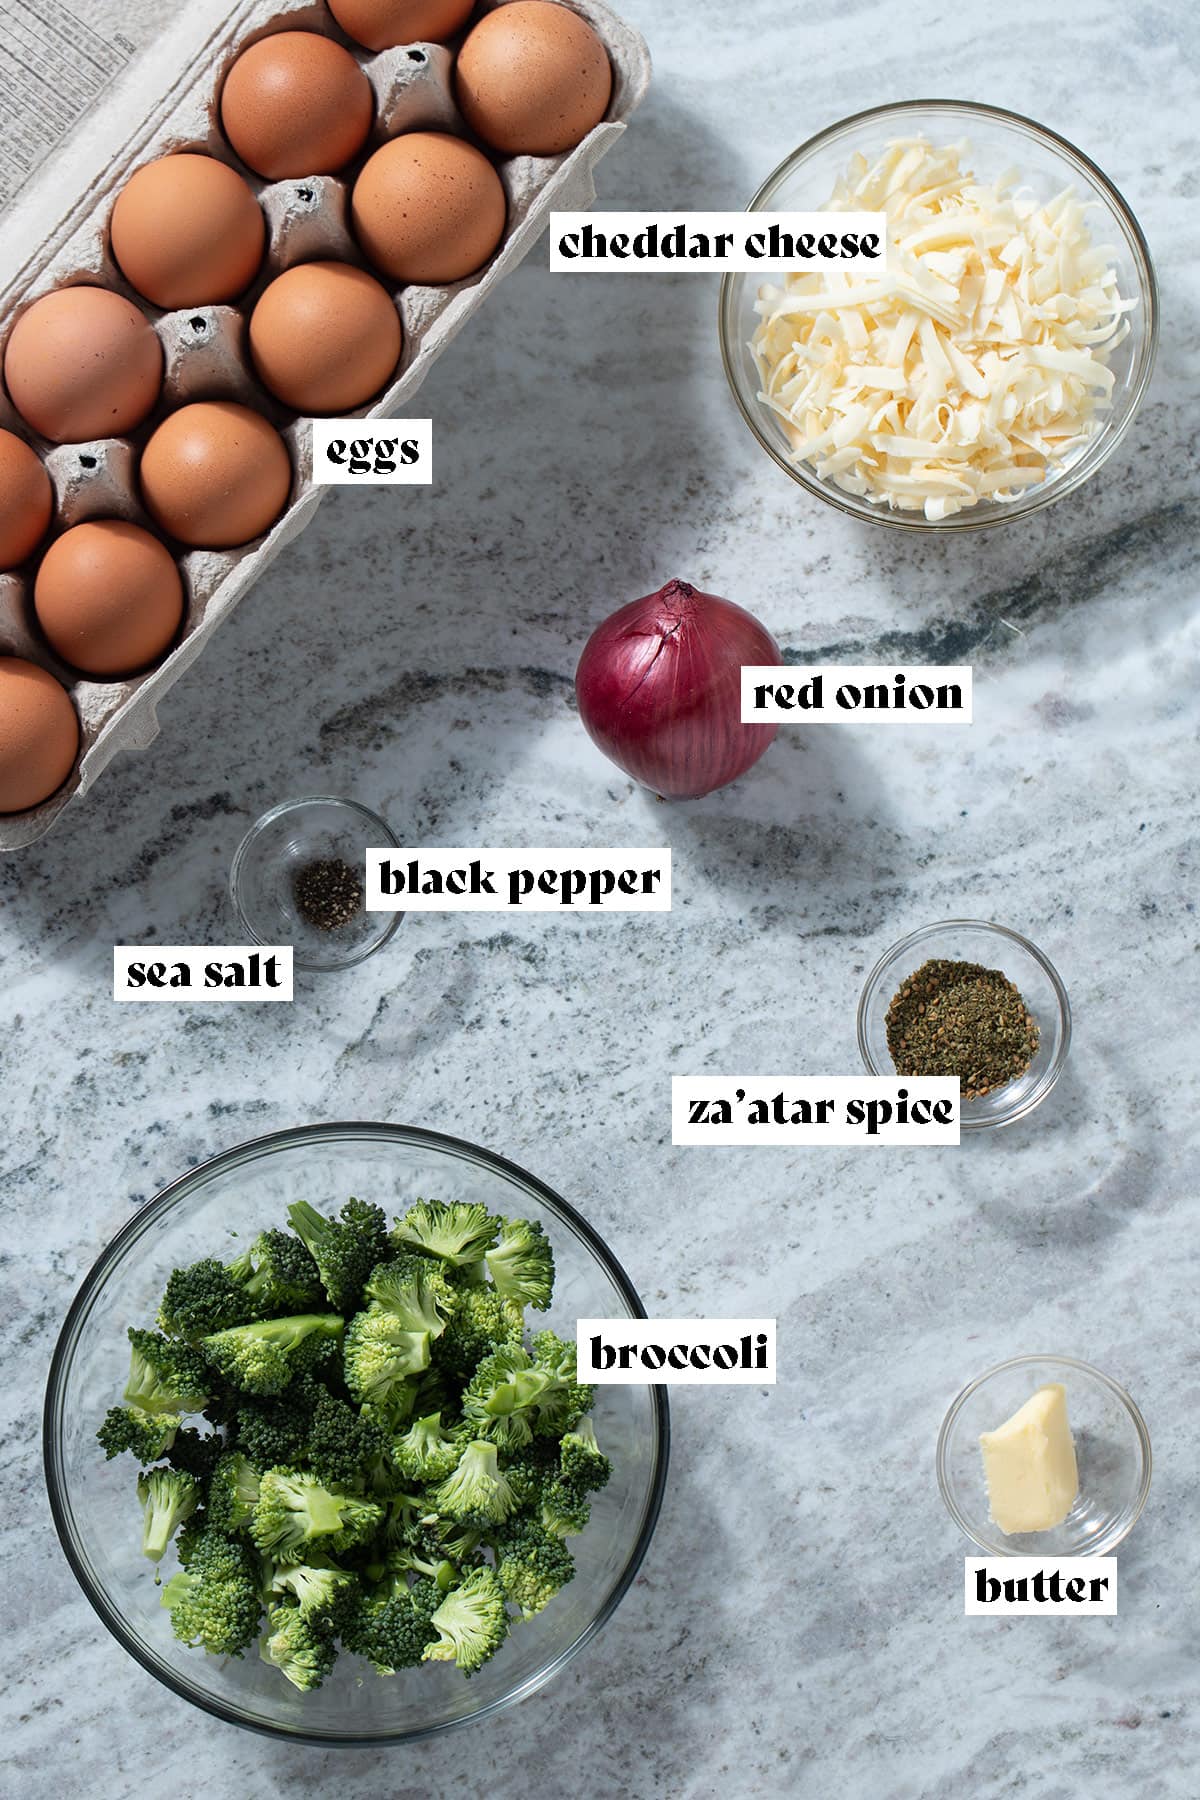 Ingredients like eggs, broccoli, red onion, and cheese laid out on a grey background with text overlay.